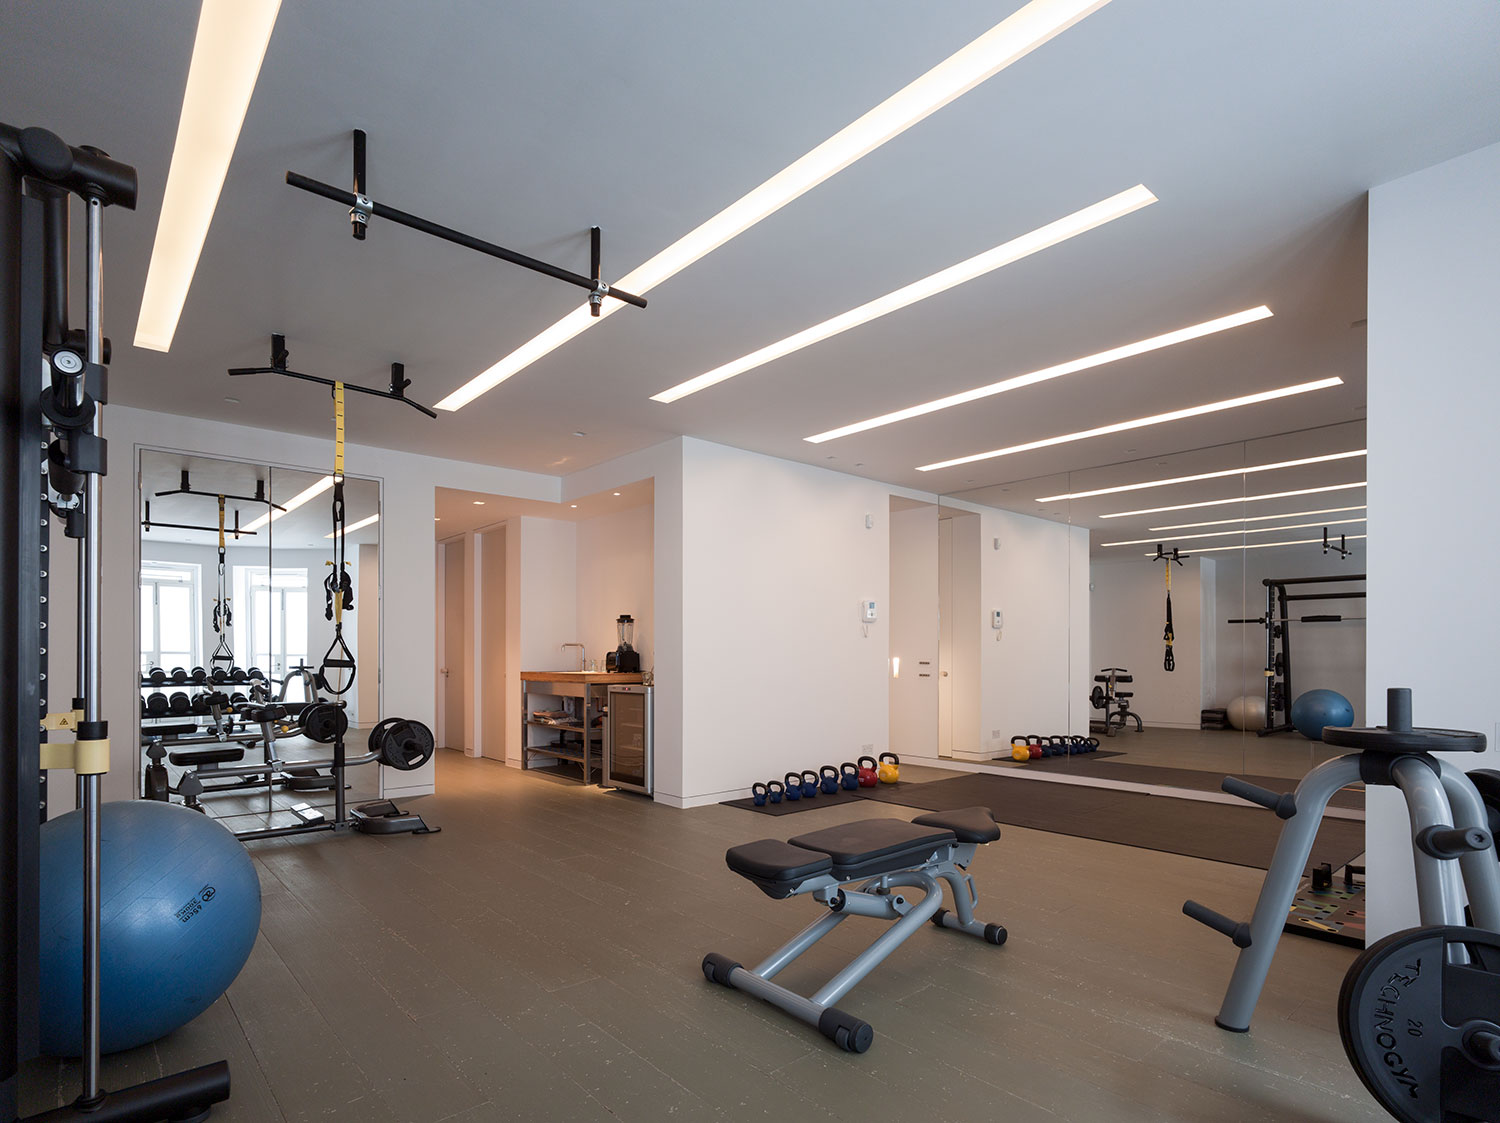 Luxury interior design project with basement gym, London